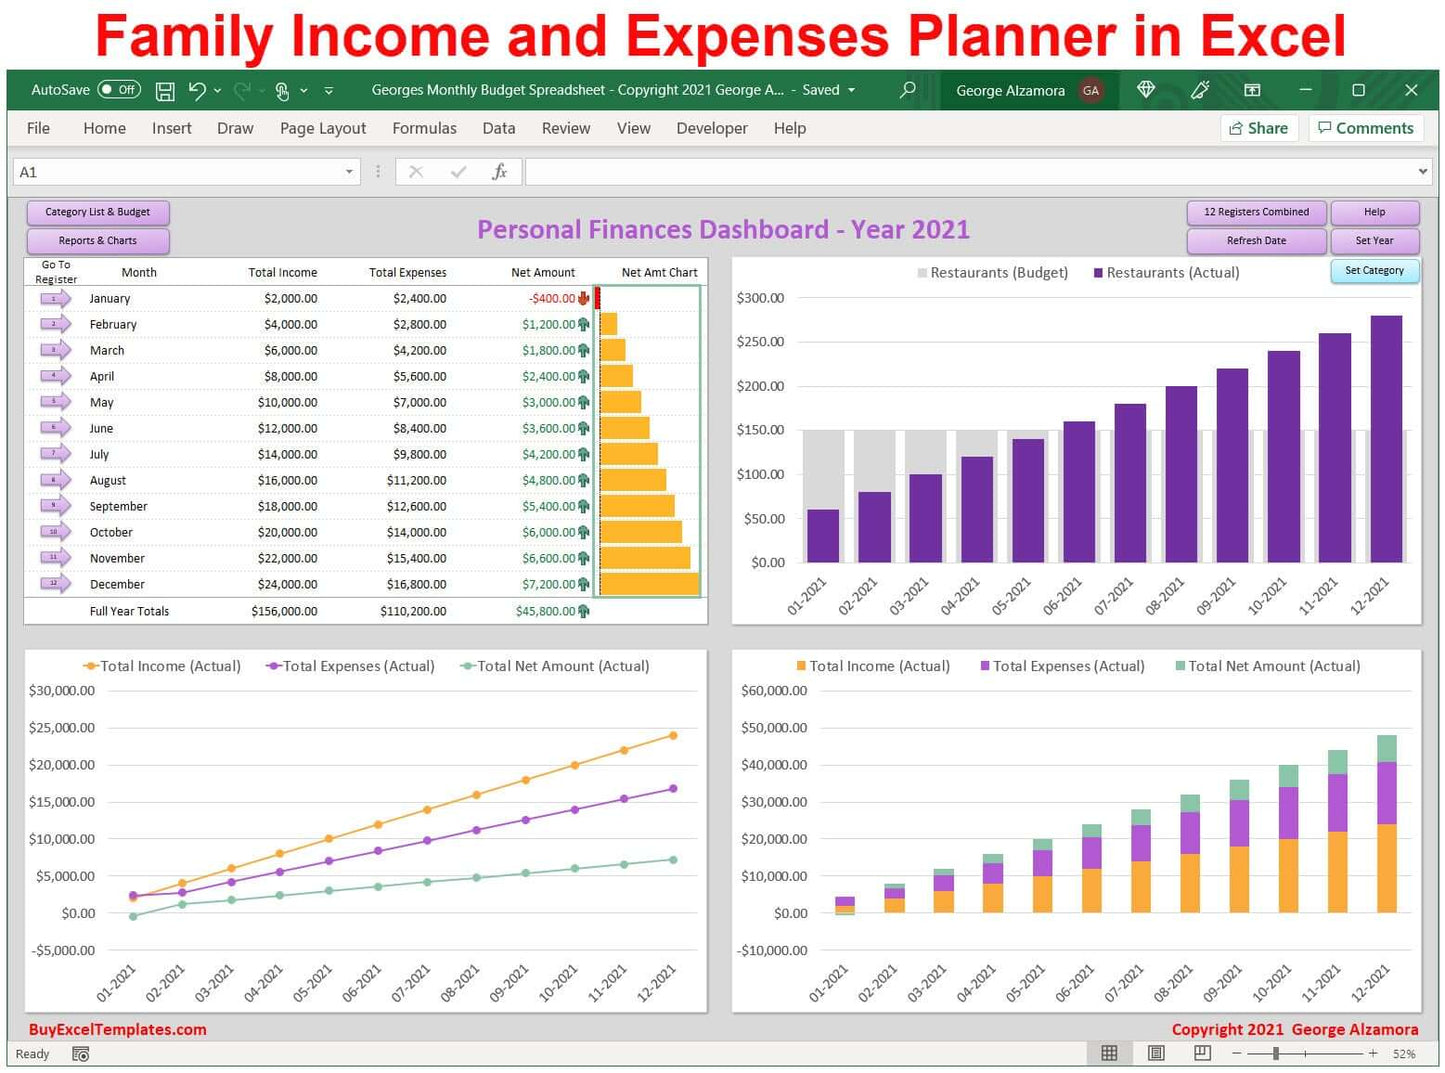 Family Income and Expenses Planner in Excel